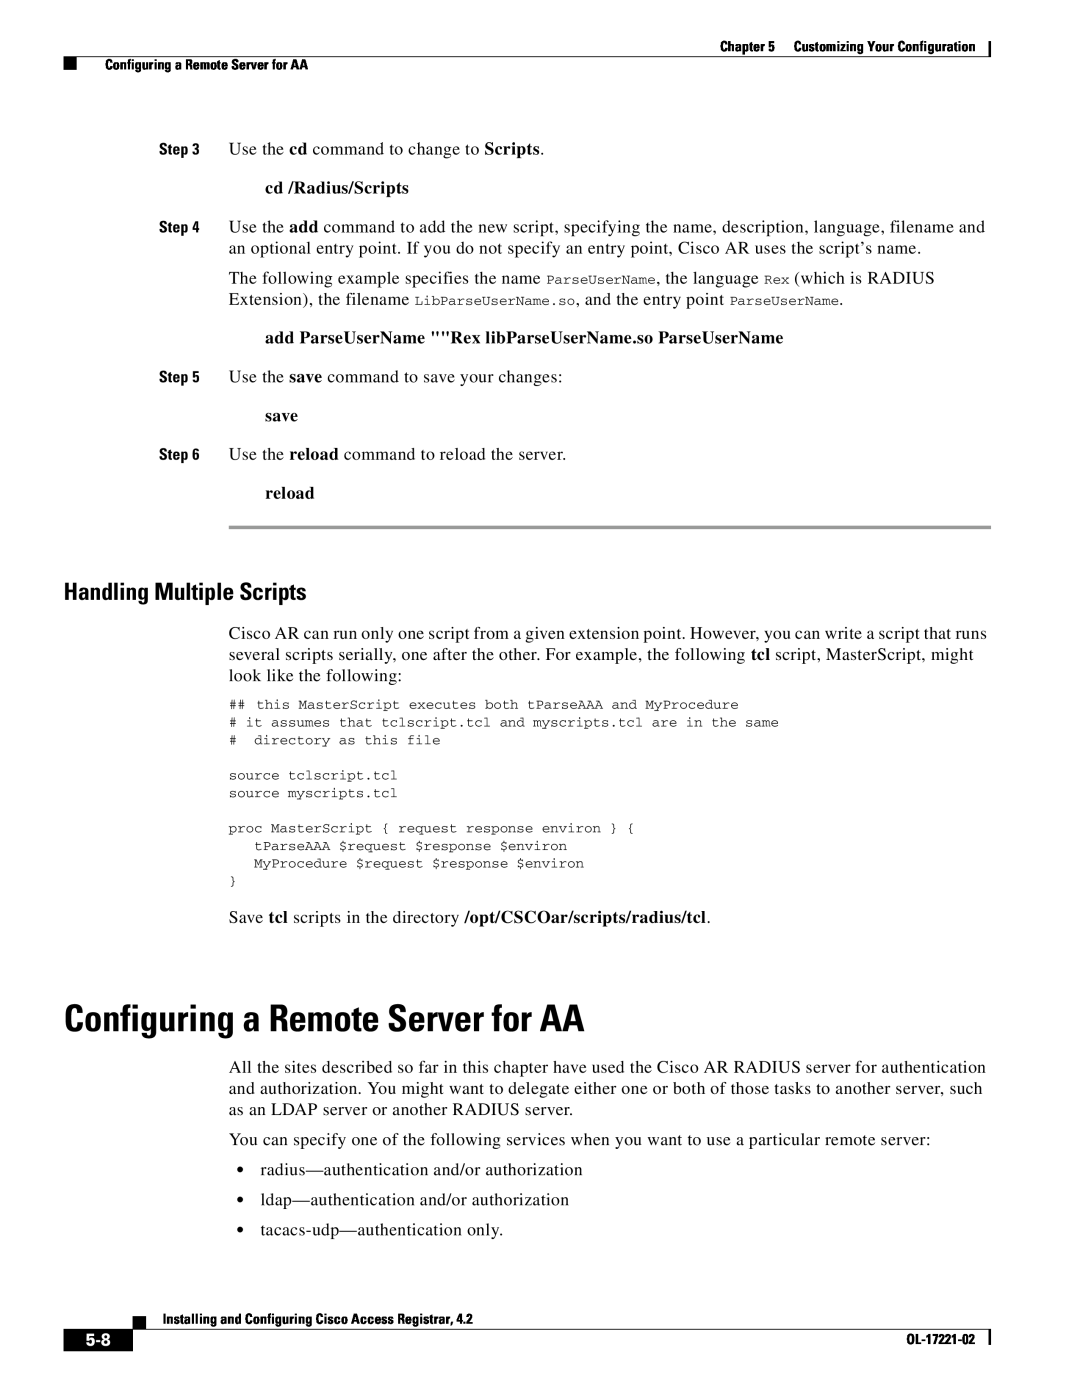 Cisco Systems 4.2 manual Configuring a Remote Server for AA, Handling Multiple Scripts, cd /Radius/Scripts, save, reload 